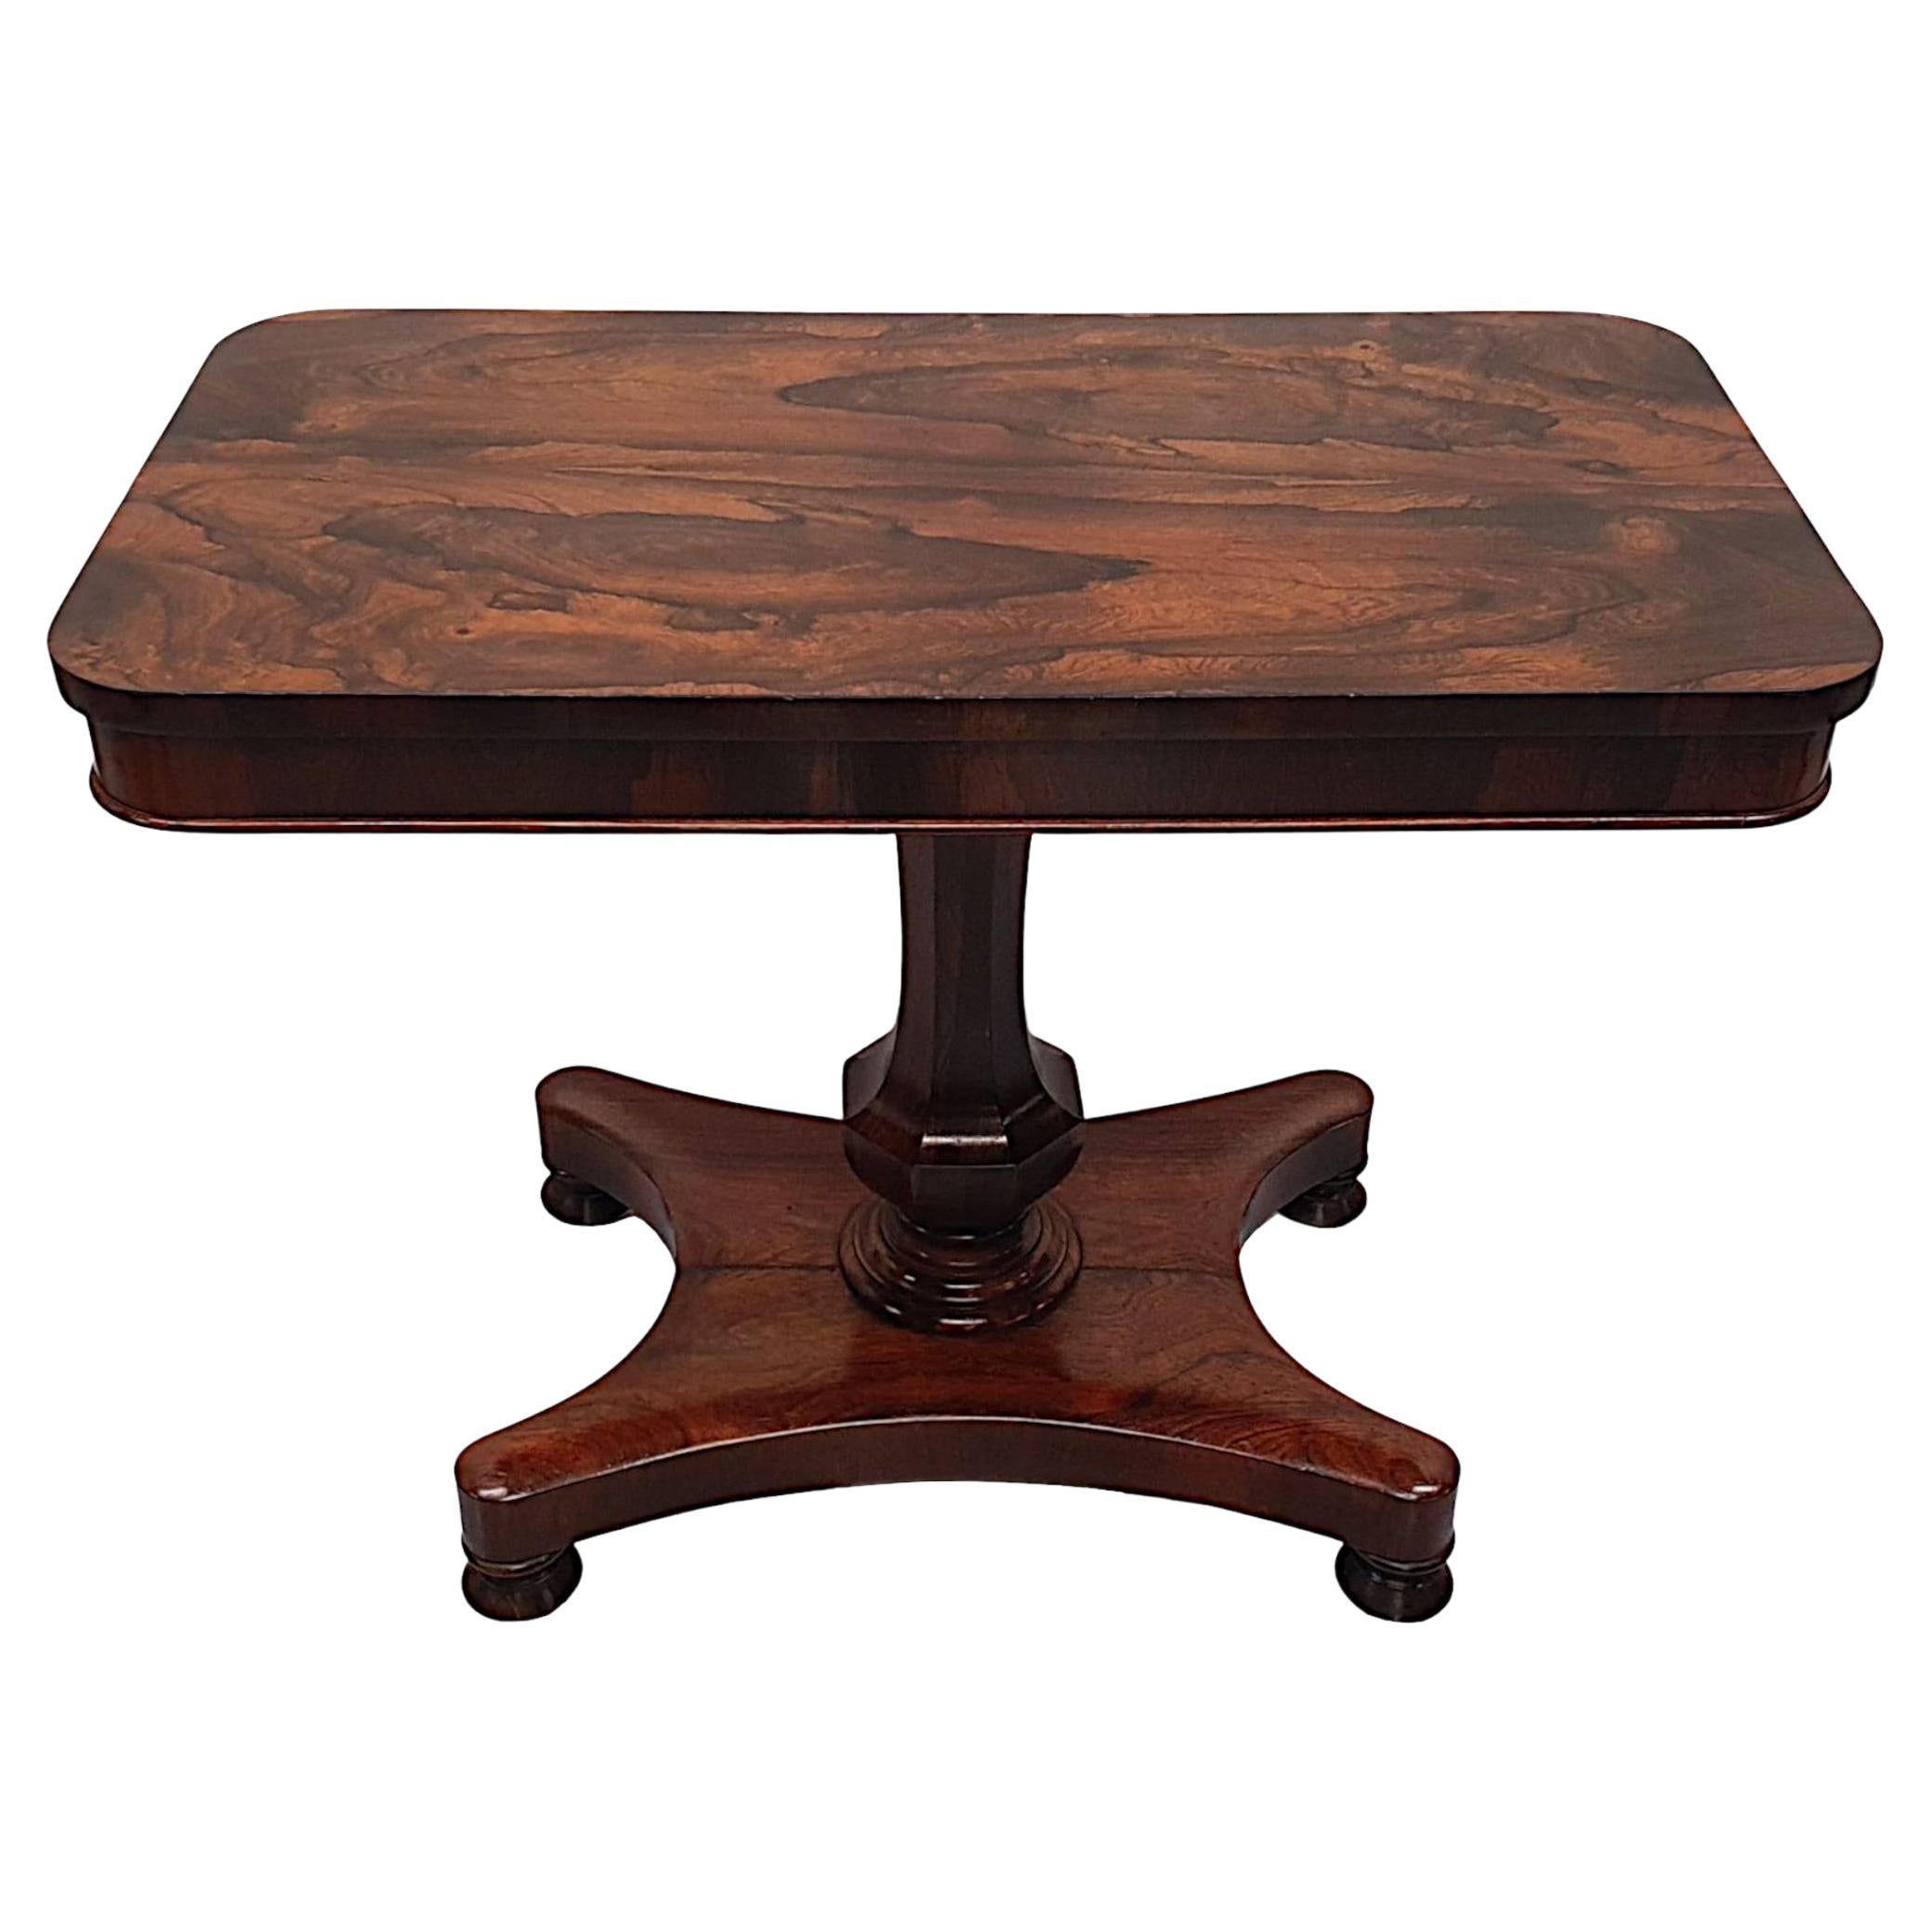 Gorgeous Early 19th Century Fruitwood Occasional or Centre Table